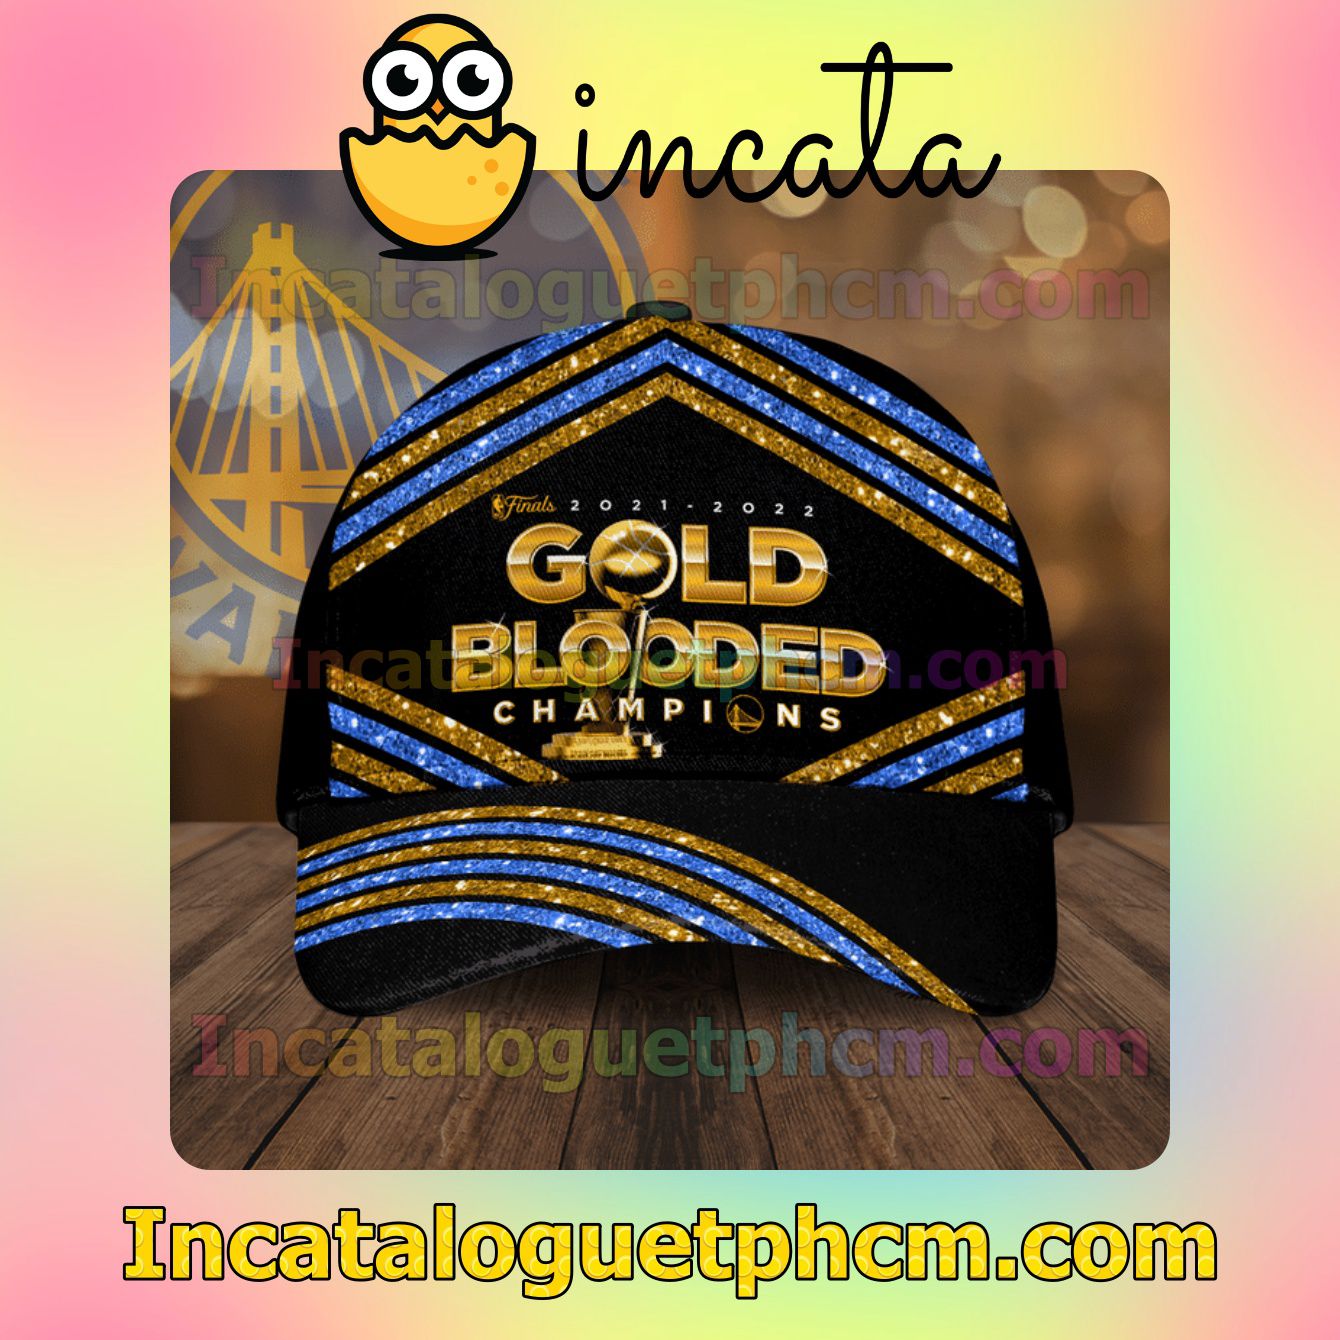 Finals 2021 2022 Gold Blooded Champions Glitter Stripes Classic Hat Caps Gift For Men